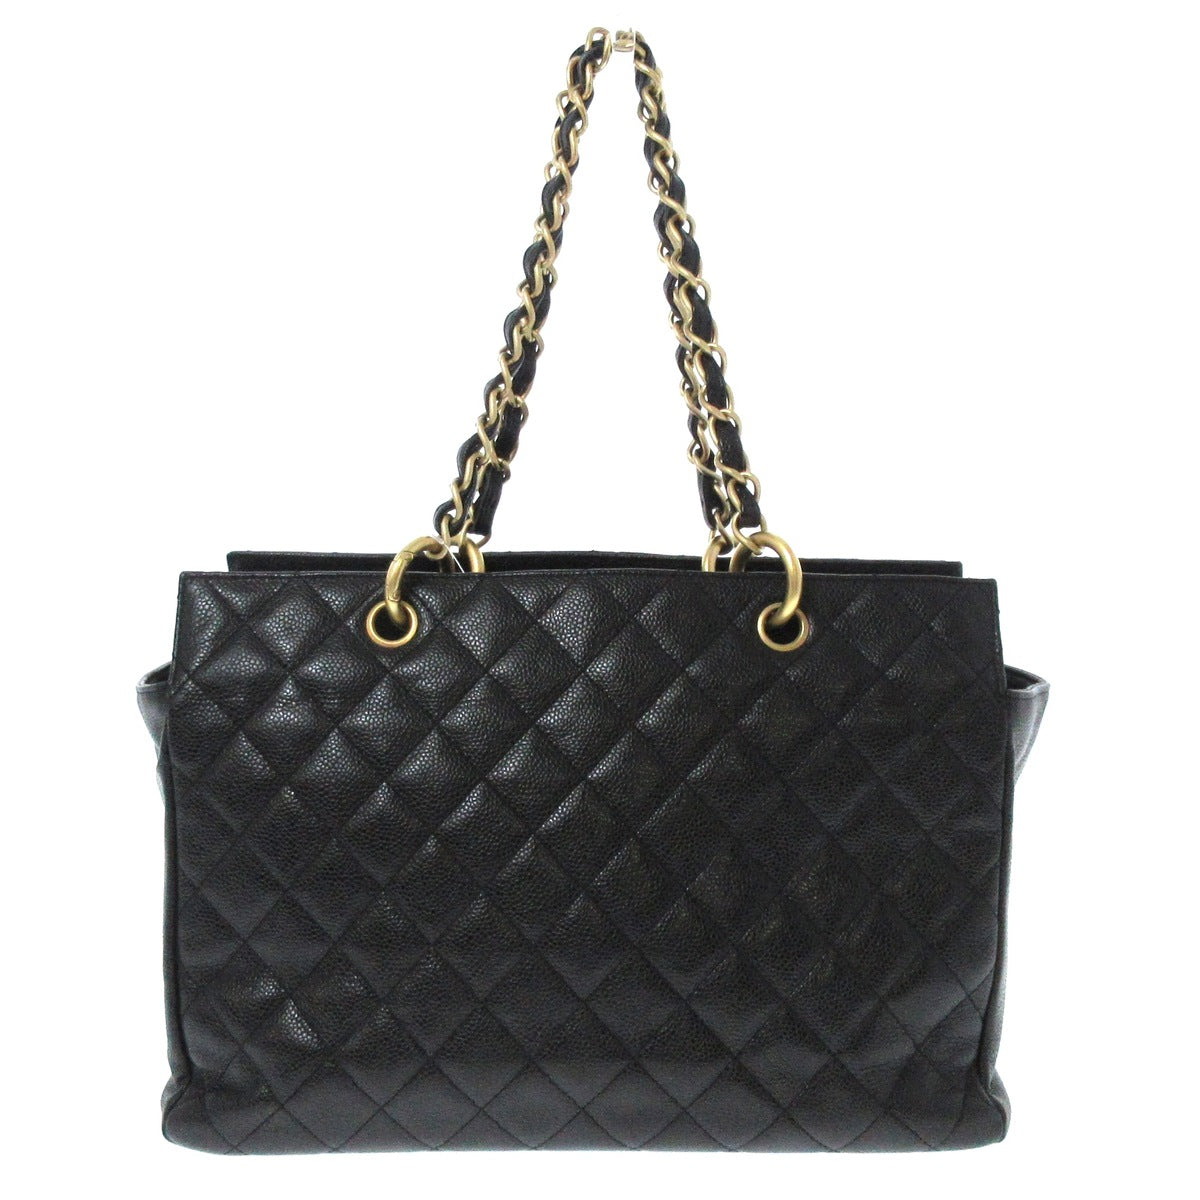 Chanel Classic CC Shopping Leather Bag